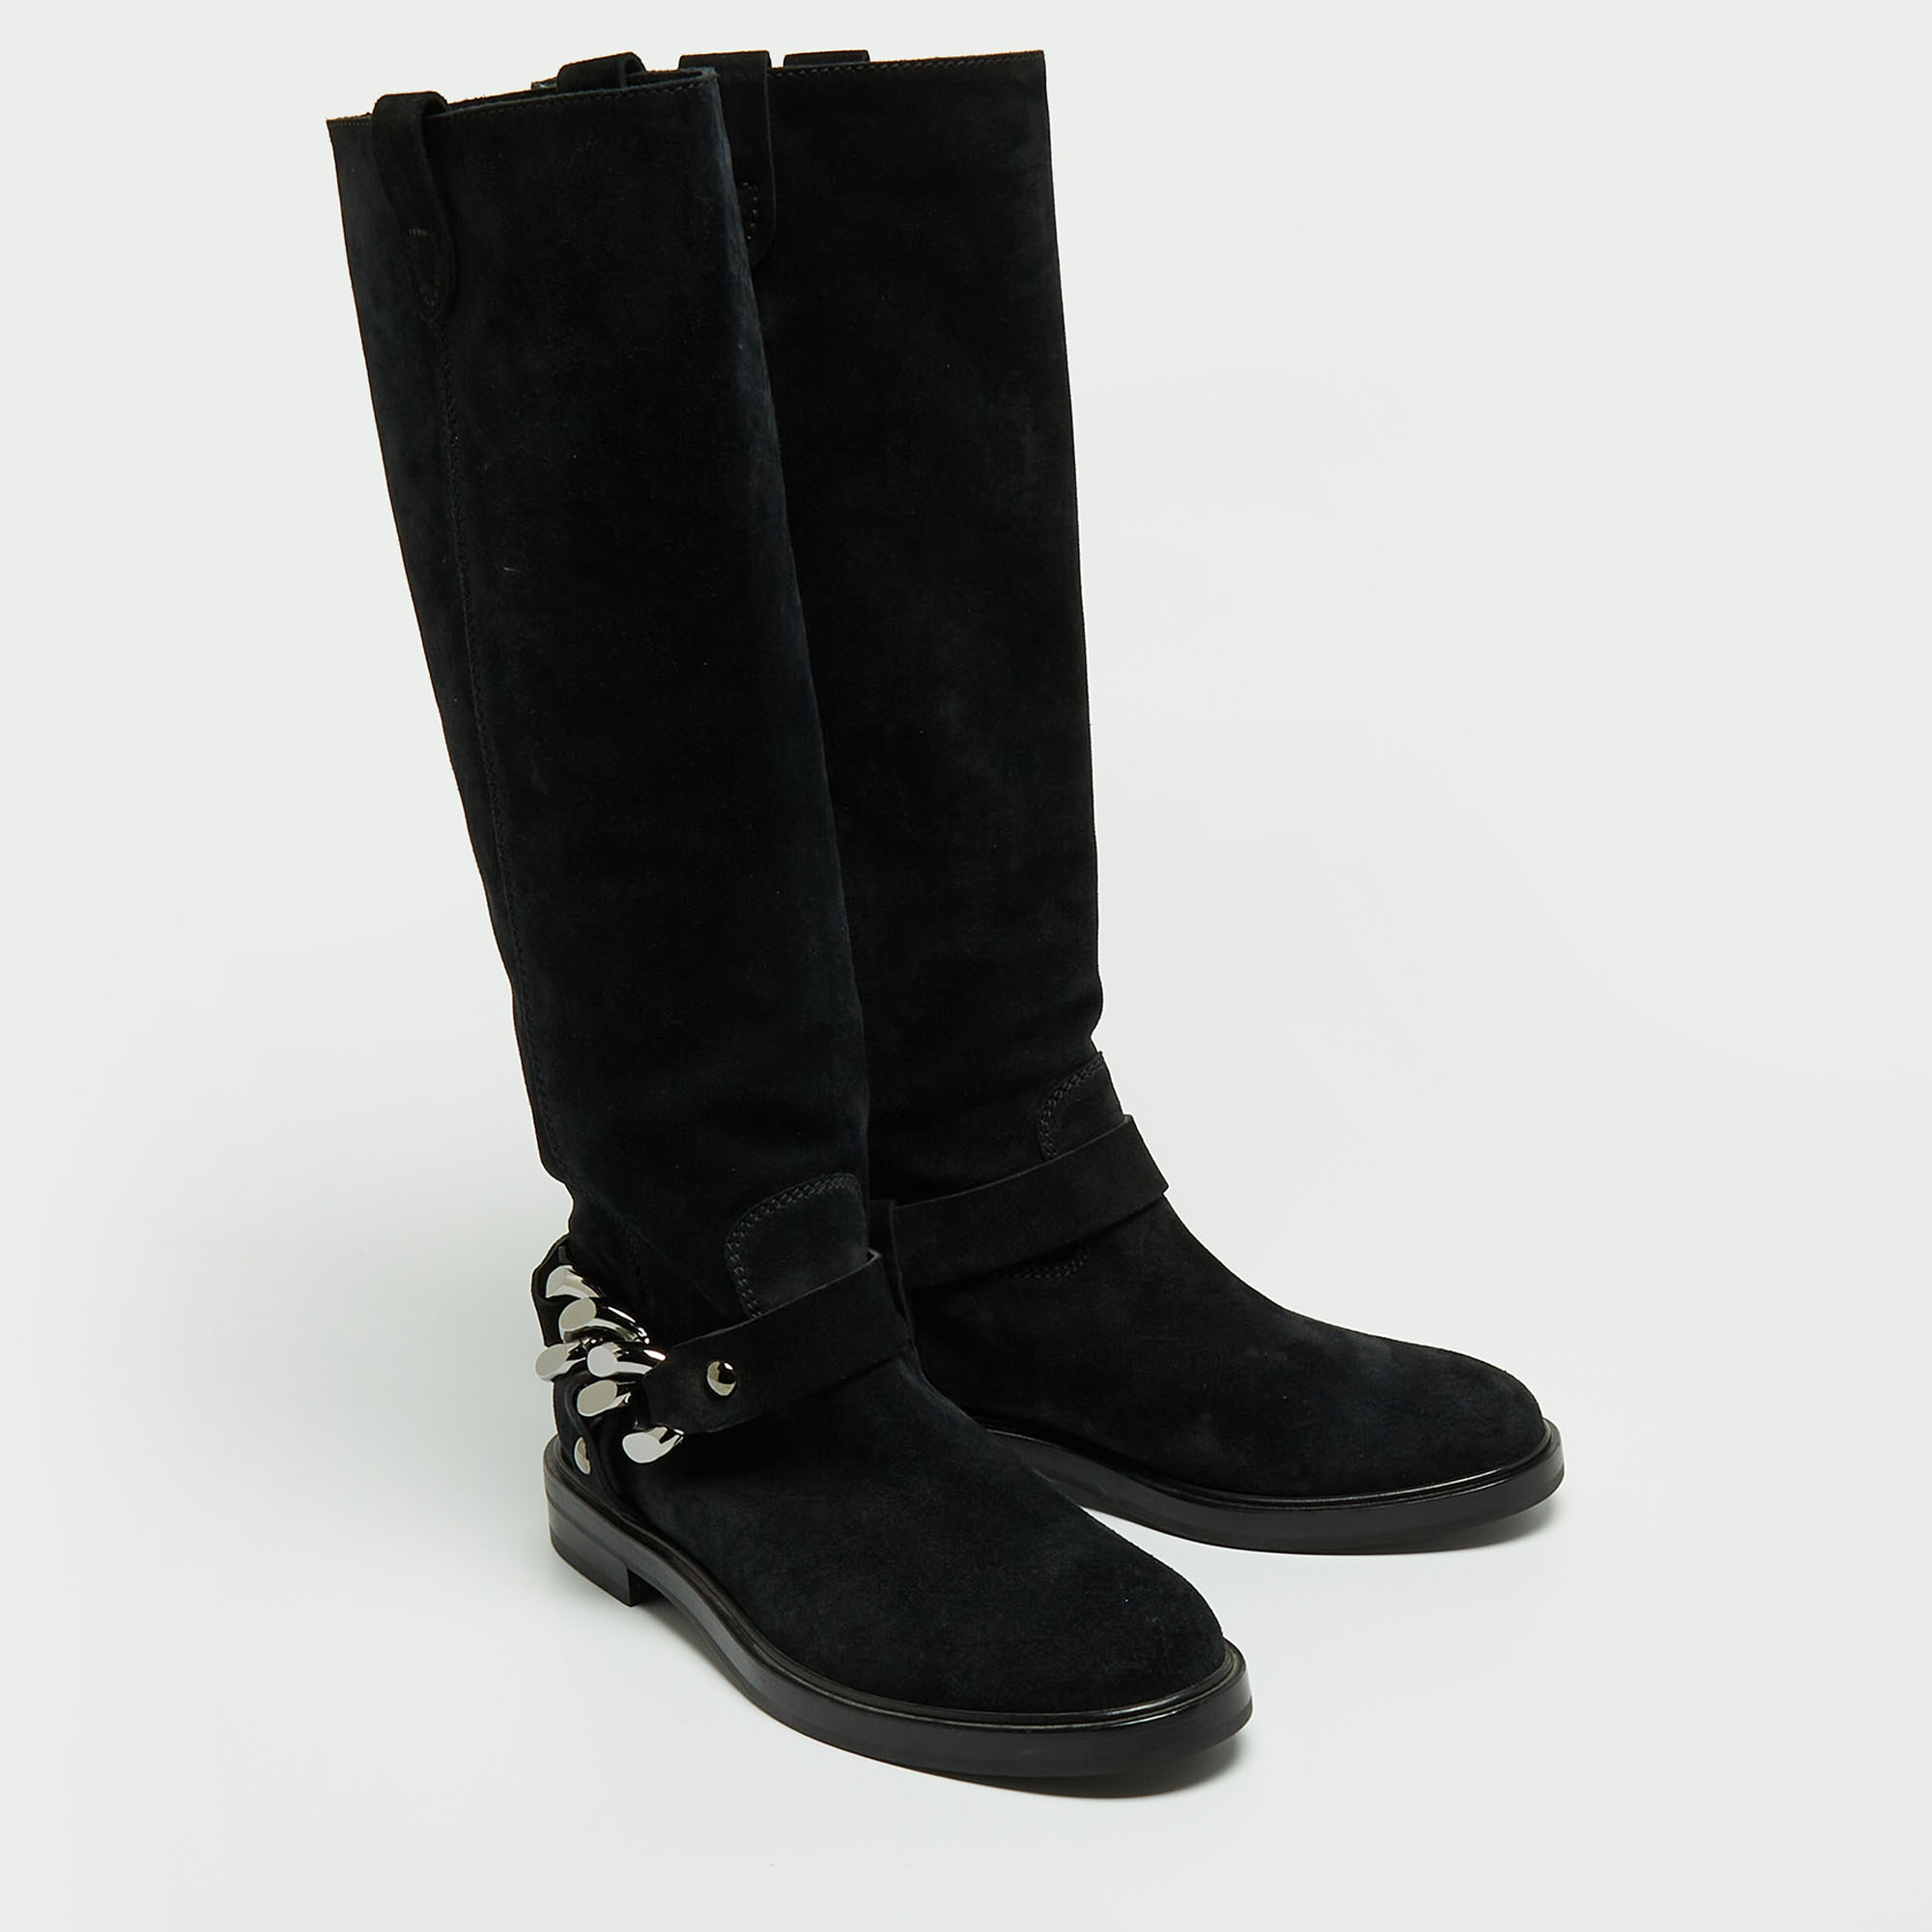 Casadei Black Suede Knee Length Boots Size 38.5